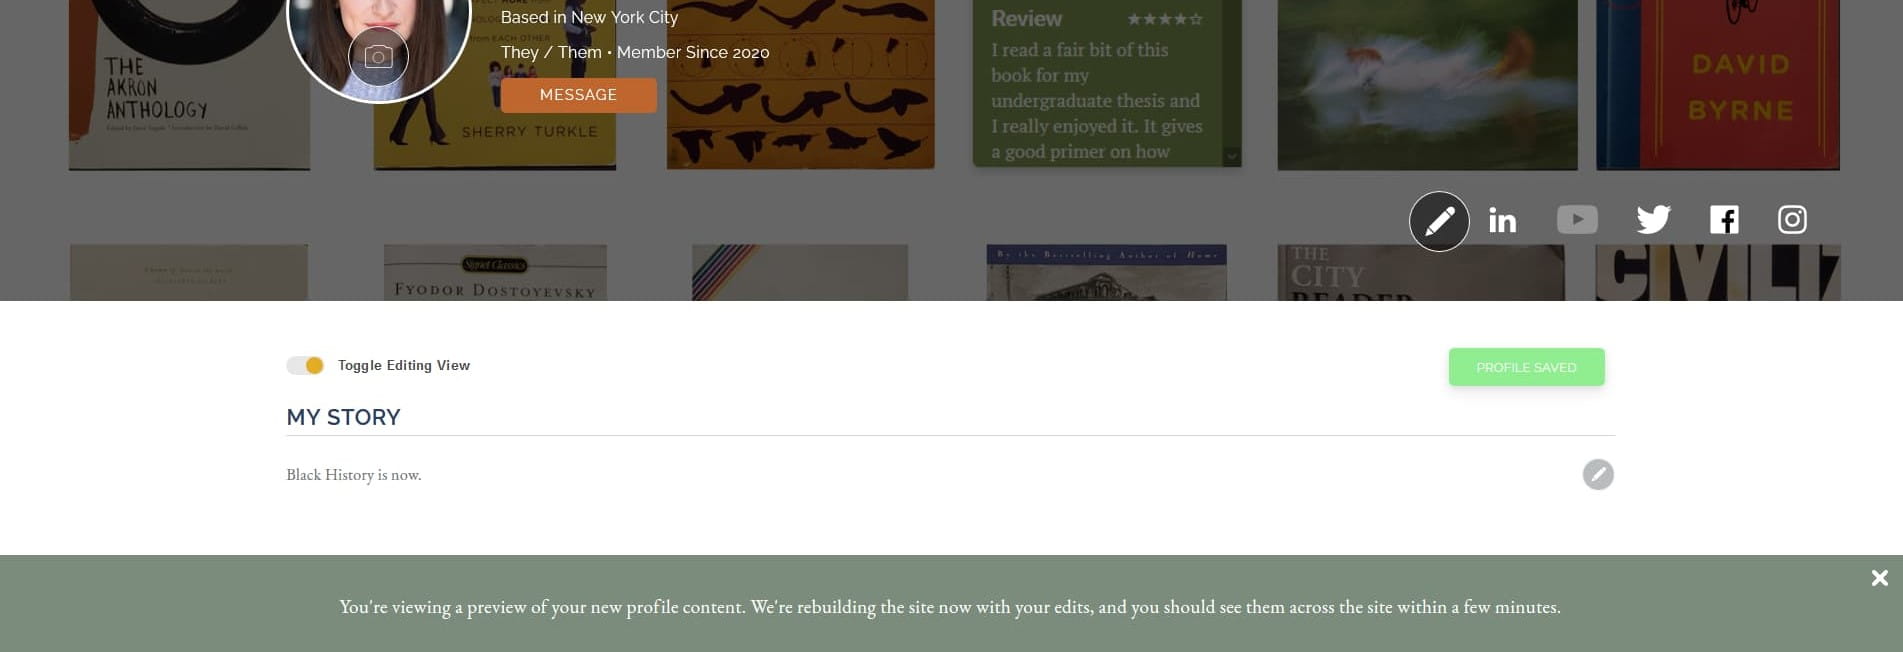 Screenshot of the banner that appears at the bottom of a profile page after editing it, which reads "Your'e viewing a preview of your new profile content. We're rebuilding the site now with your edits, and you should see them across the site within a few minutes." Not my favorite bit of UX I've created.